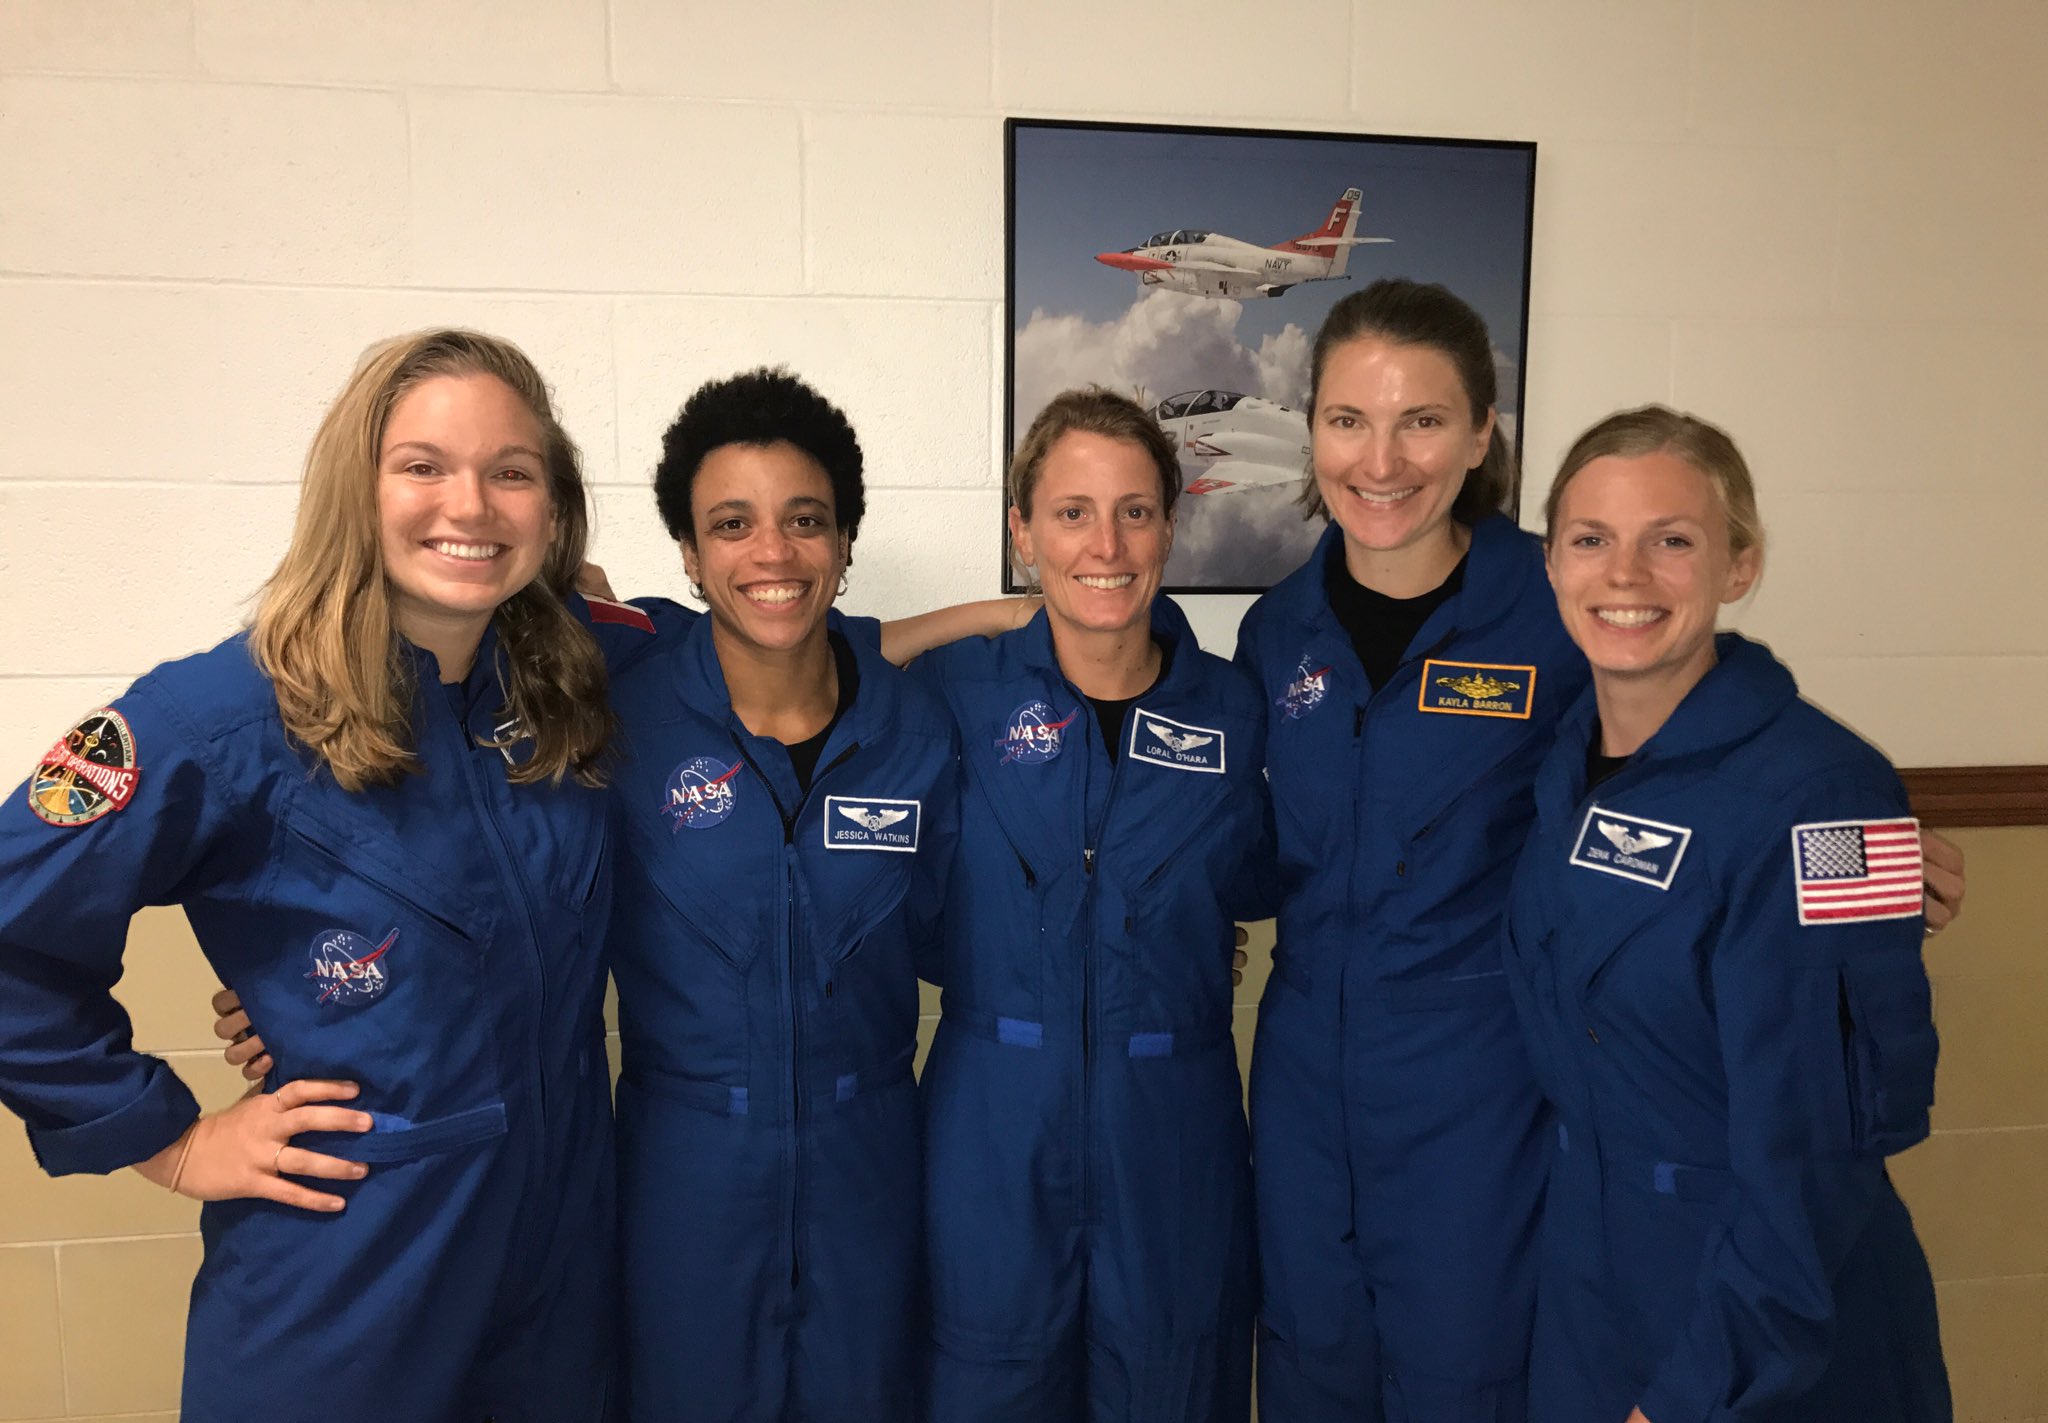 I'm celebrating #AdaLovelaceDay with a few inspiring female engineers and scientists in my #astronaut @NASA class https://t.co/ac2TippX4h